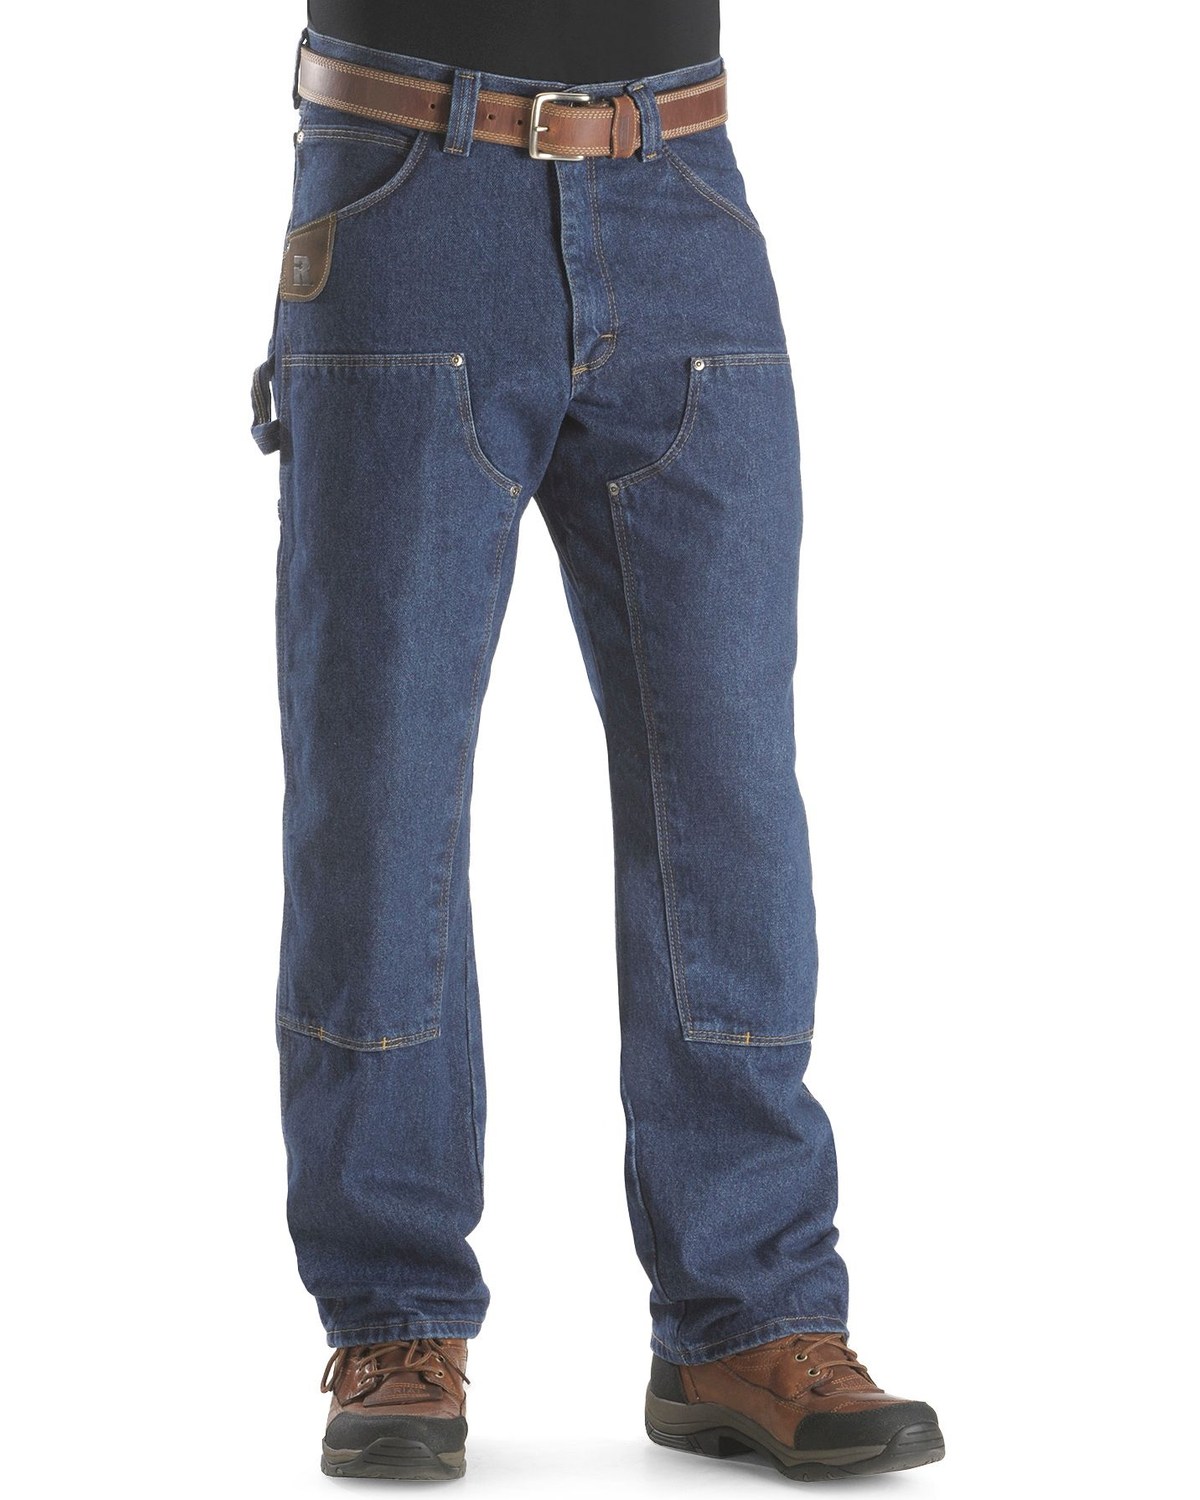 Riggs Workwear Men's Utility Work Jeans | Boot Barn